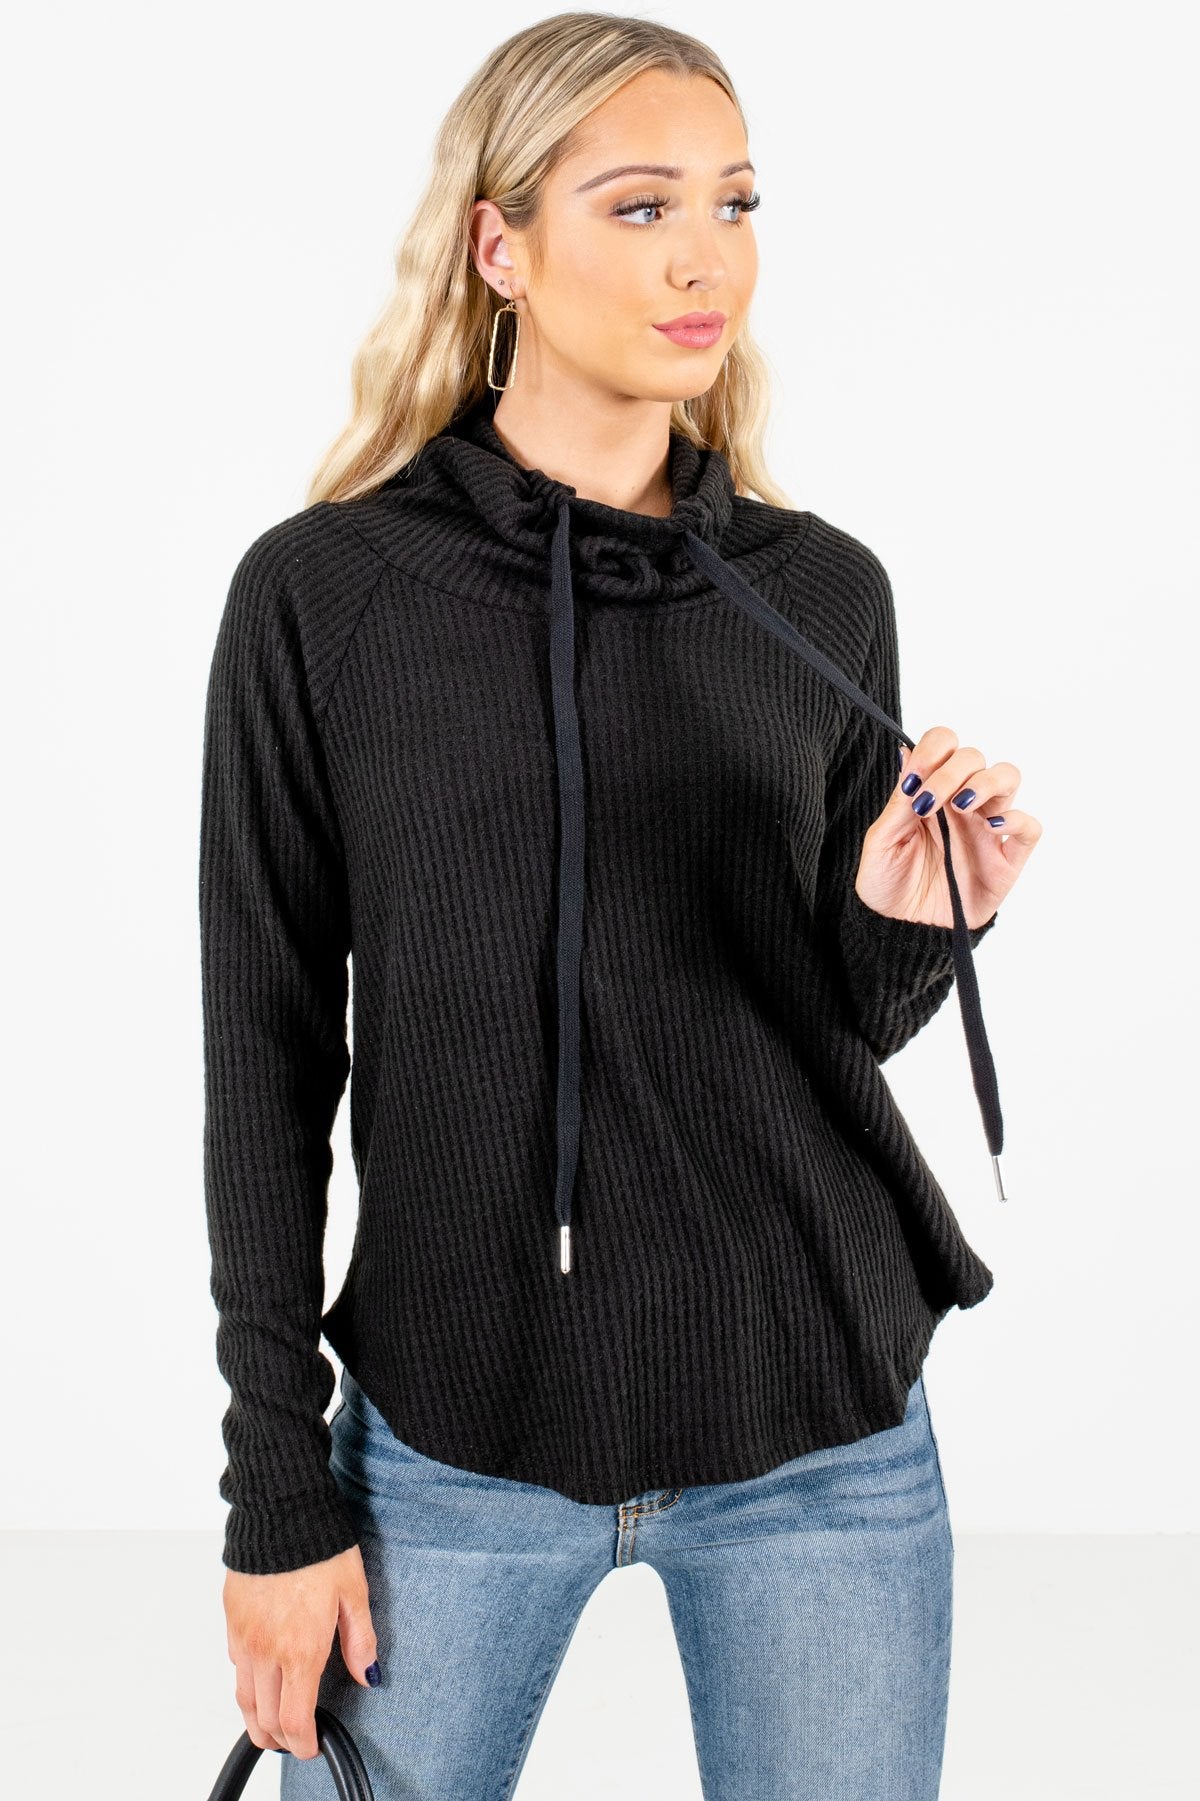 Women’s Black Casual Everyday Boutique Sweater